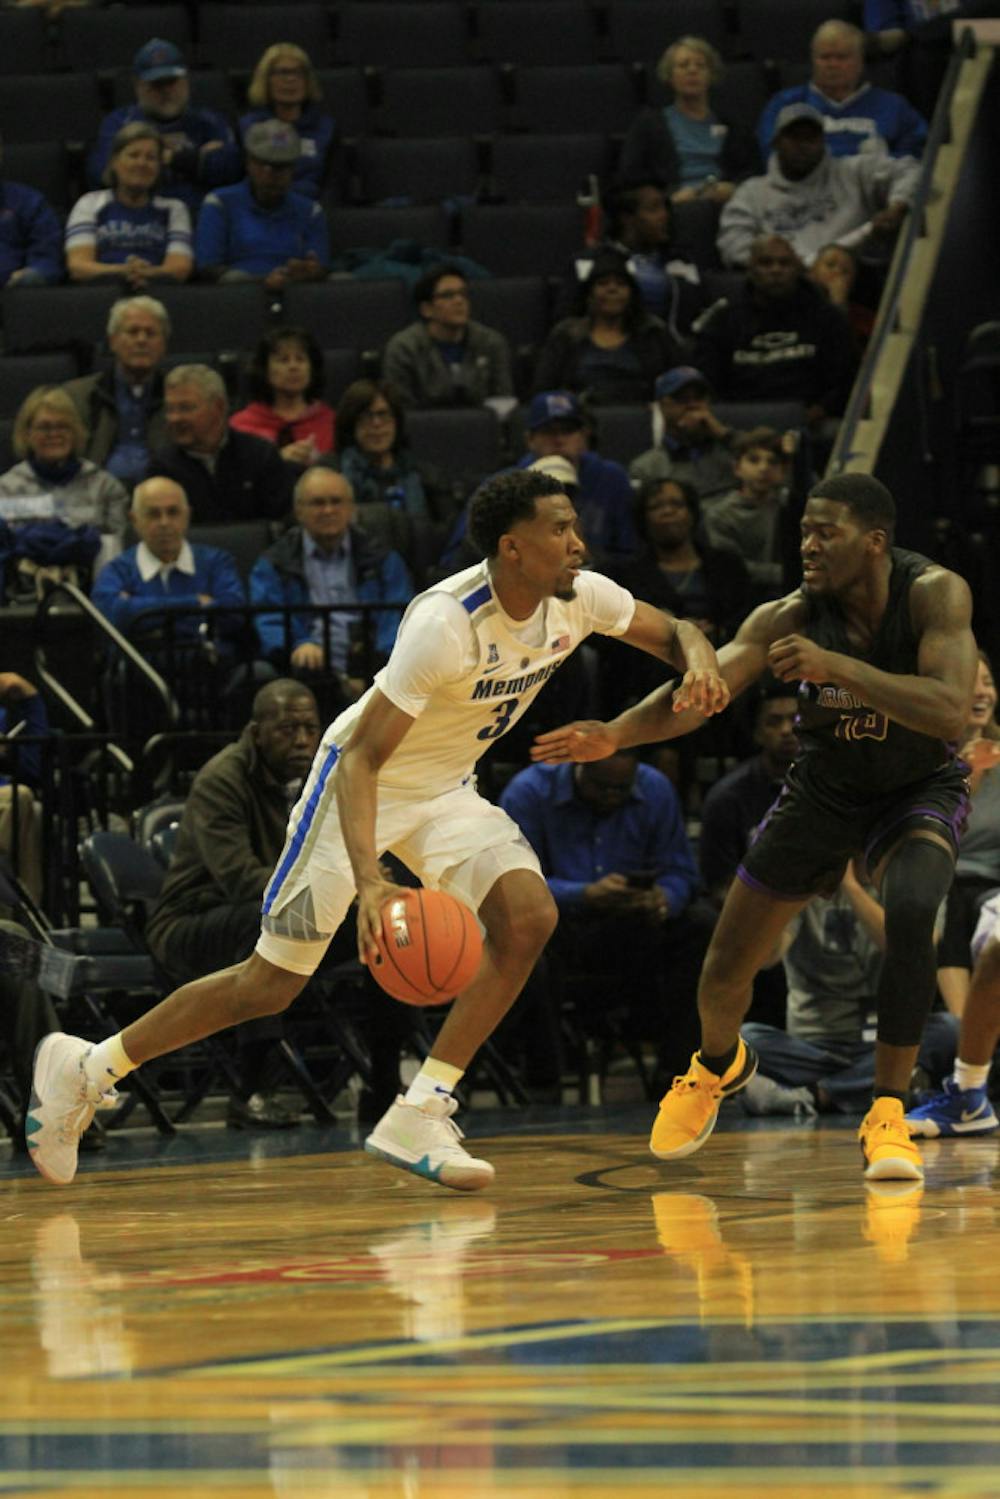 <p>Jeremiah Martin drives against a defender. Martin finished with 11 points shooting 3-9 from the field.&nbsp;</p>